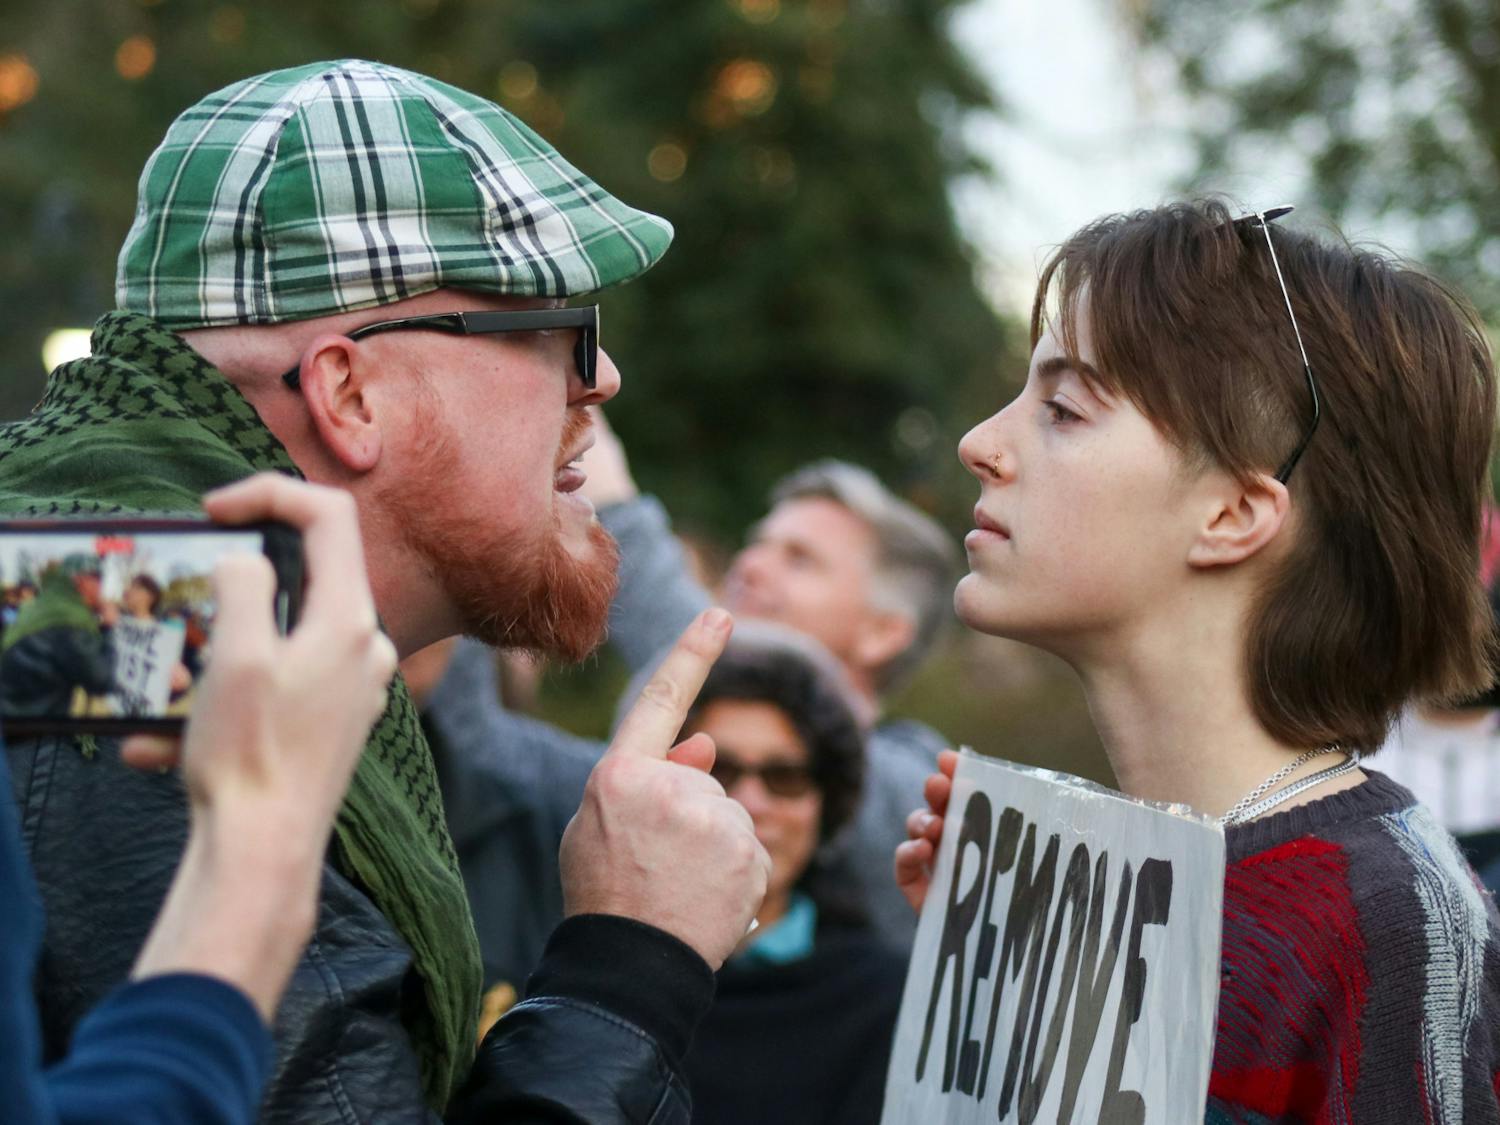 Attendee JT Bessinger (left) and protestor and third-year media arts student Katelynn Basile (right) engage in a verbal altercation with each other at the Statehouse on Jan. 28, 2023. A crowd gathered outside of the Statehouse on Saturday as former President Donald Trump spoke inside to invitees and members of the media.